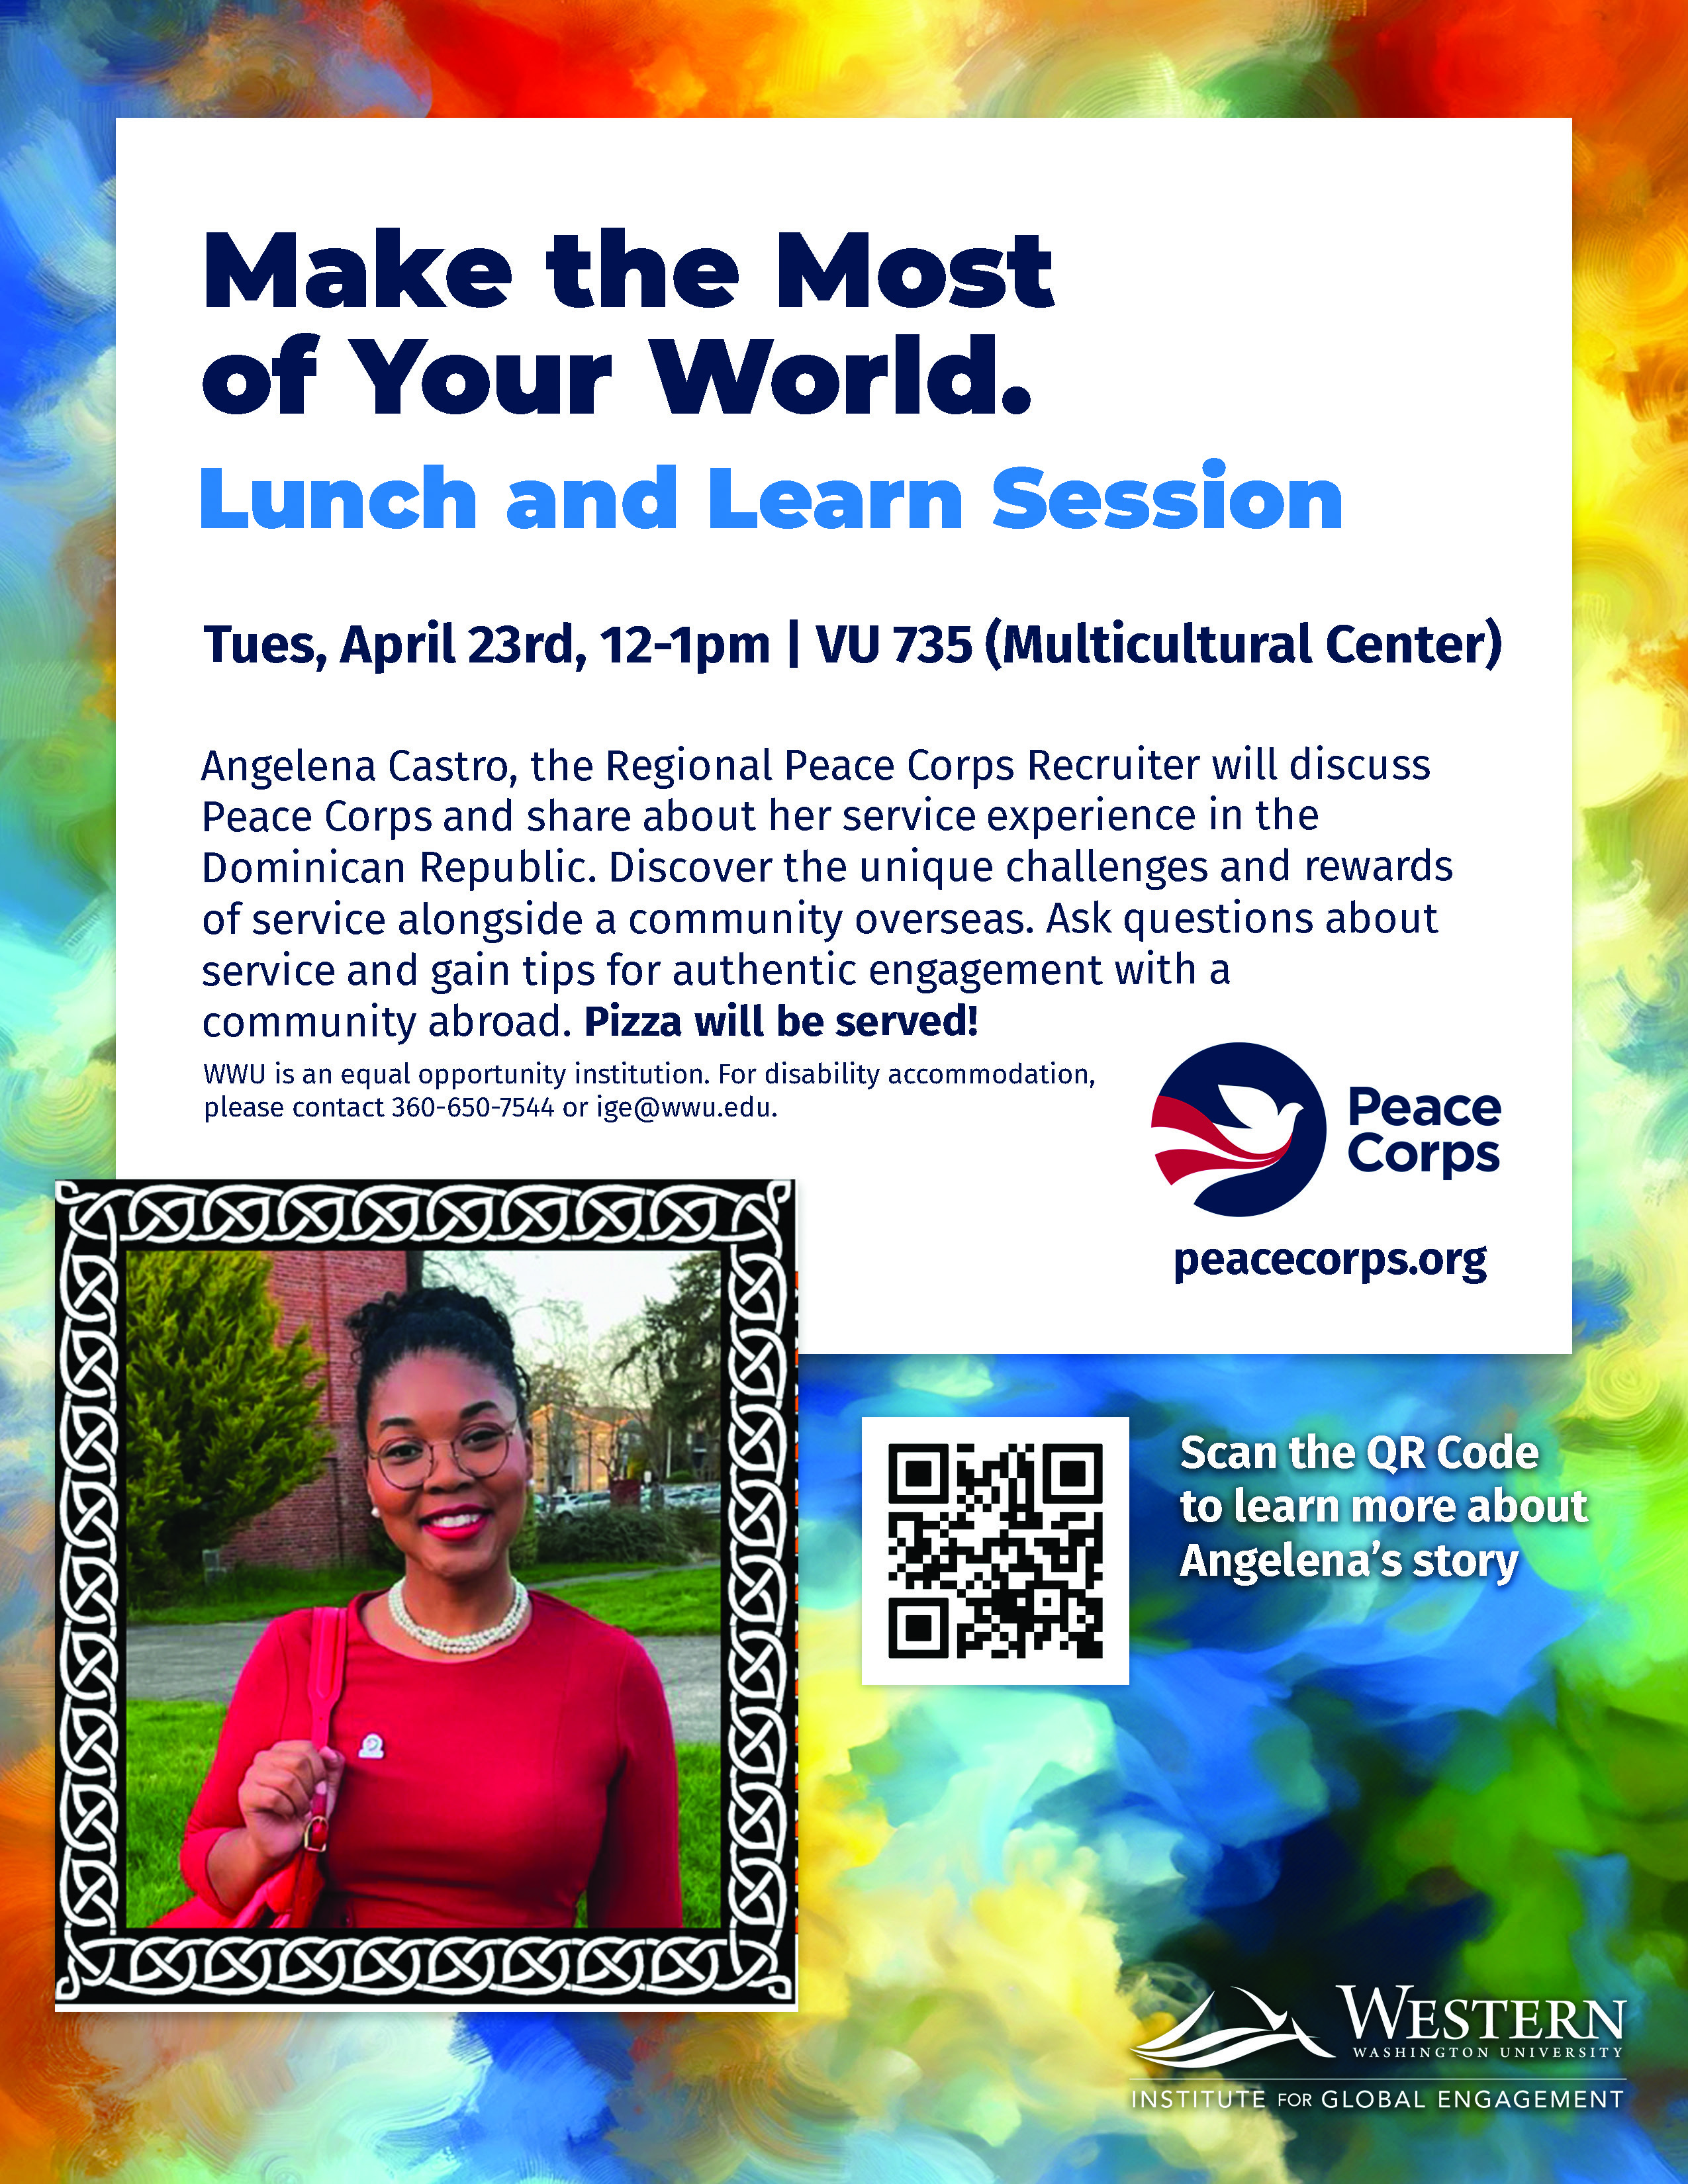 decorative flyer for Peace Corps event with Angelena Castro's headshot